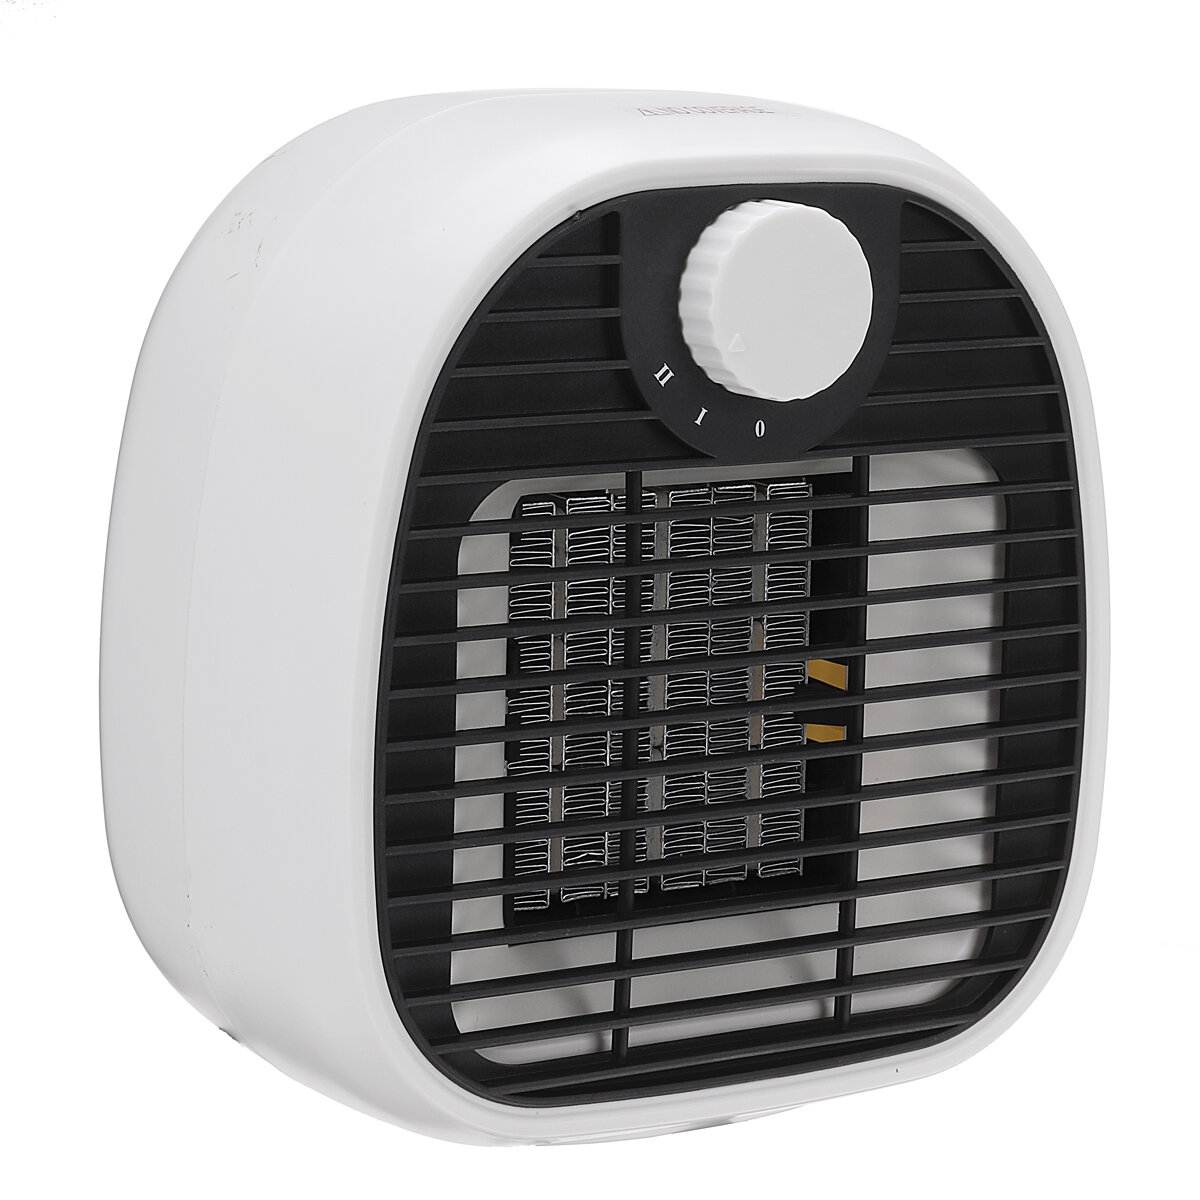 

Mini Desktop Electric Space Heater 2 Gear PTC Heating Low Noise Warm Air Blower for Home Office